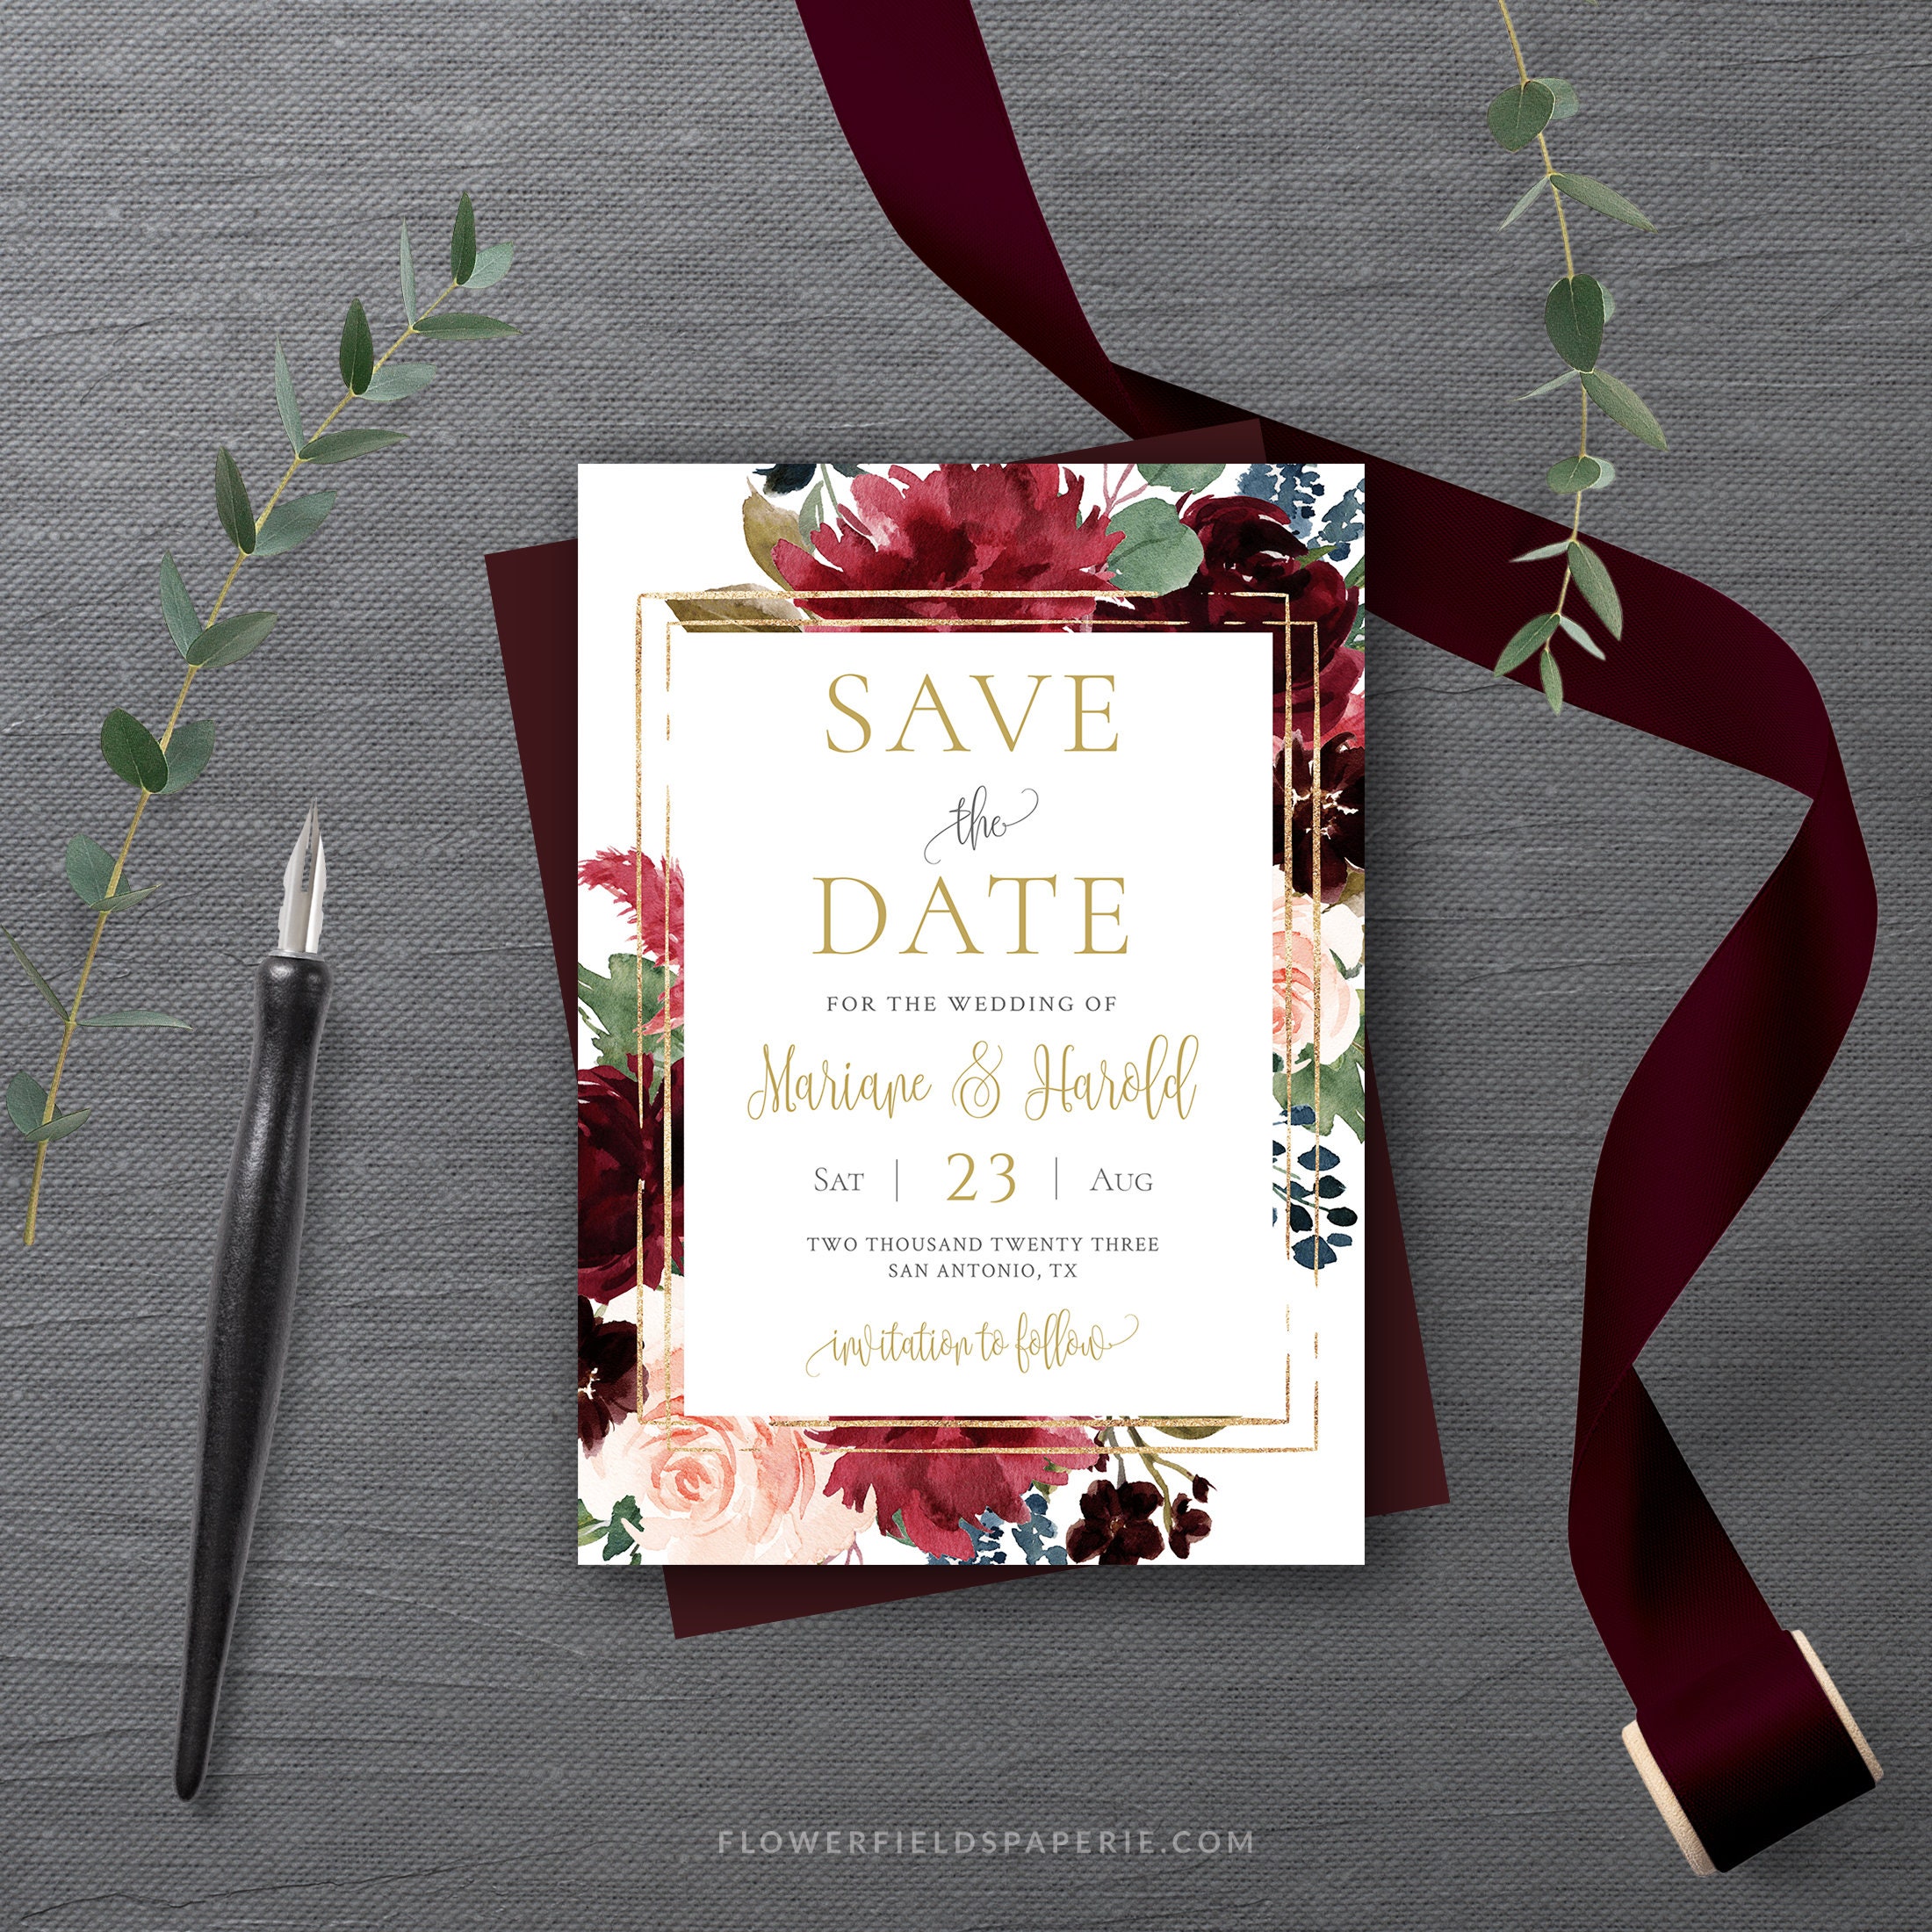 Save The Date Postcards Templates